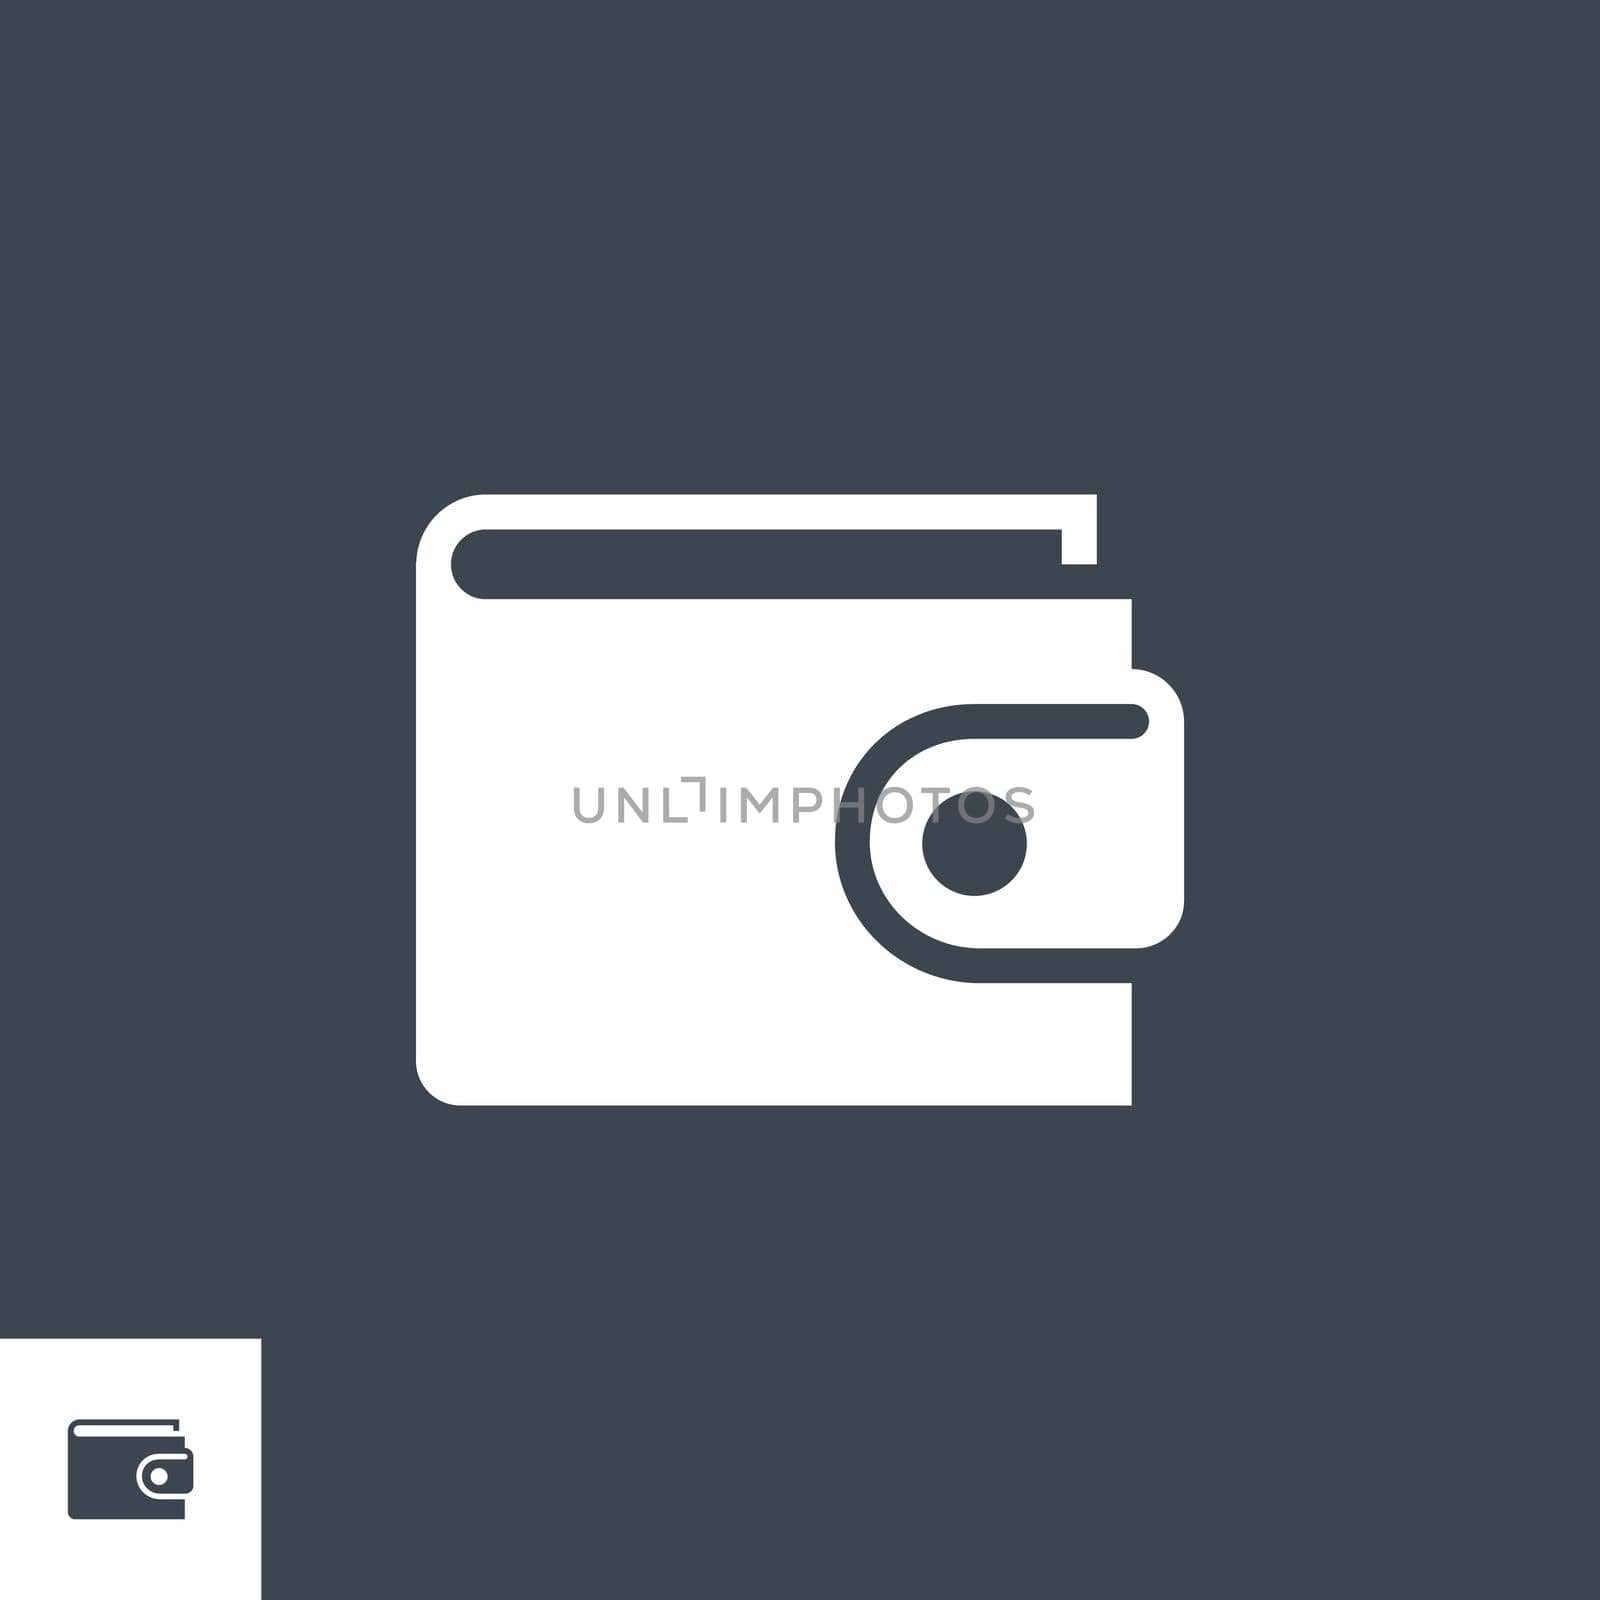 Personal Wallet related vector glyph icon. Isolated on black background. Vector illustration.